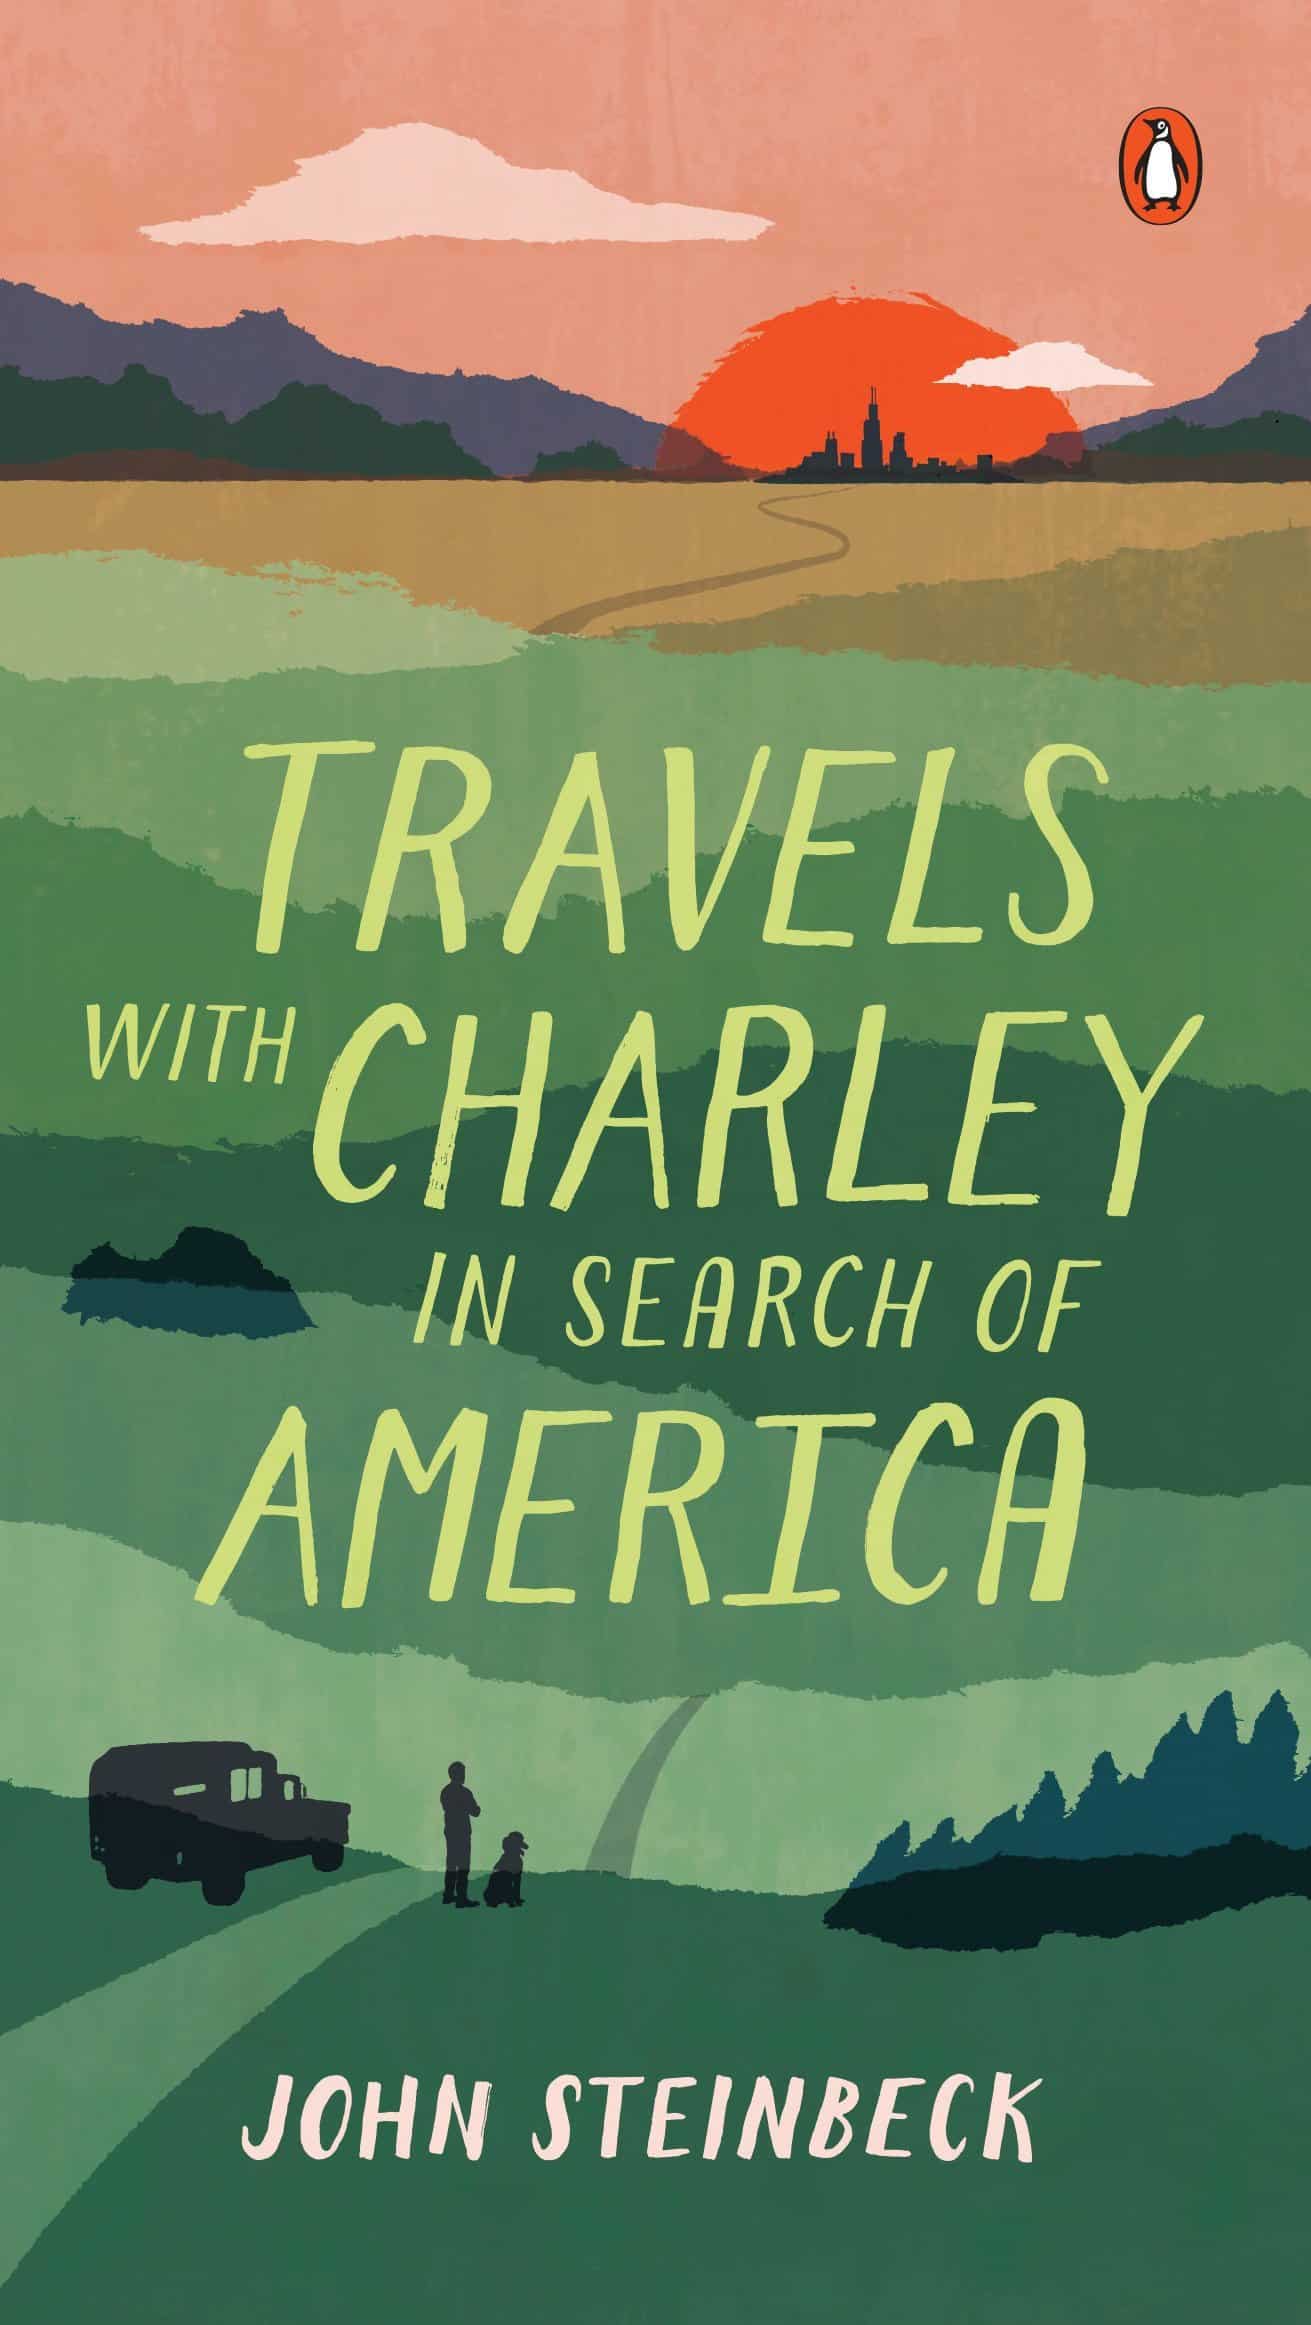 <ul> <li><strong>Runtime:</strong> 7 hours, 58 minutes</li>    <li><strong>Author:</strong> John Steinbeck</li>    <li><strong>Narrator:</strong> Gary Sinise</li> </ul>    <p><em>Travels with Charley in Search of America</em> by John Steinbeck is a captivating travelogue that takes readers on a journey with the author and his dog across 1960s America. In audiobook form, it feels like the listener is on a trip with Steinbeck and Charley themselves. People love how Steinbeck's narrative skillfully combines personal reflection with social commentary during a pivotal time in the nation's history. The audiobook version of the book offers a unique perspective on the country's landscapes and people through Steinbeck's eyes (and narrator Gary Gary Sinise's voice).</p>